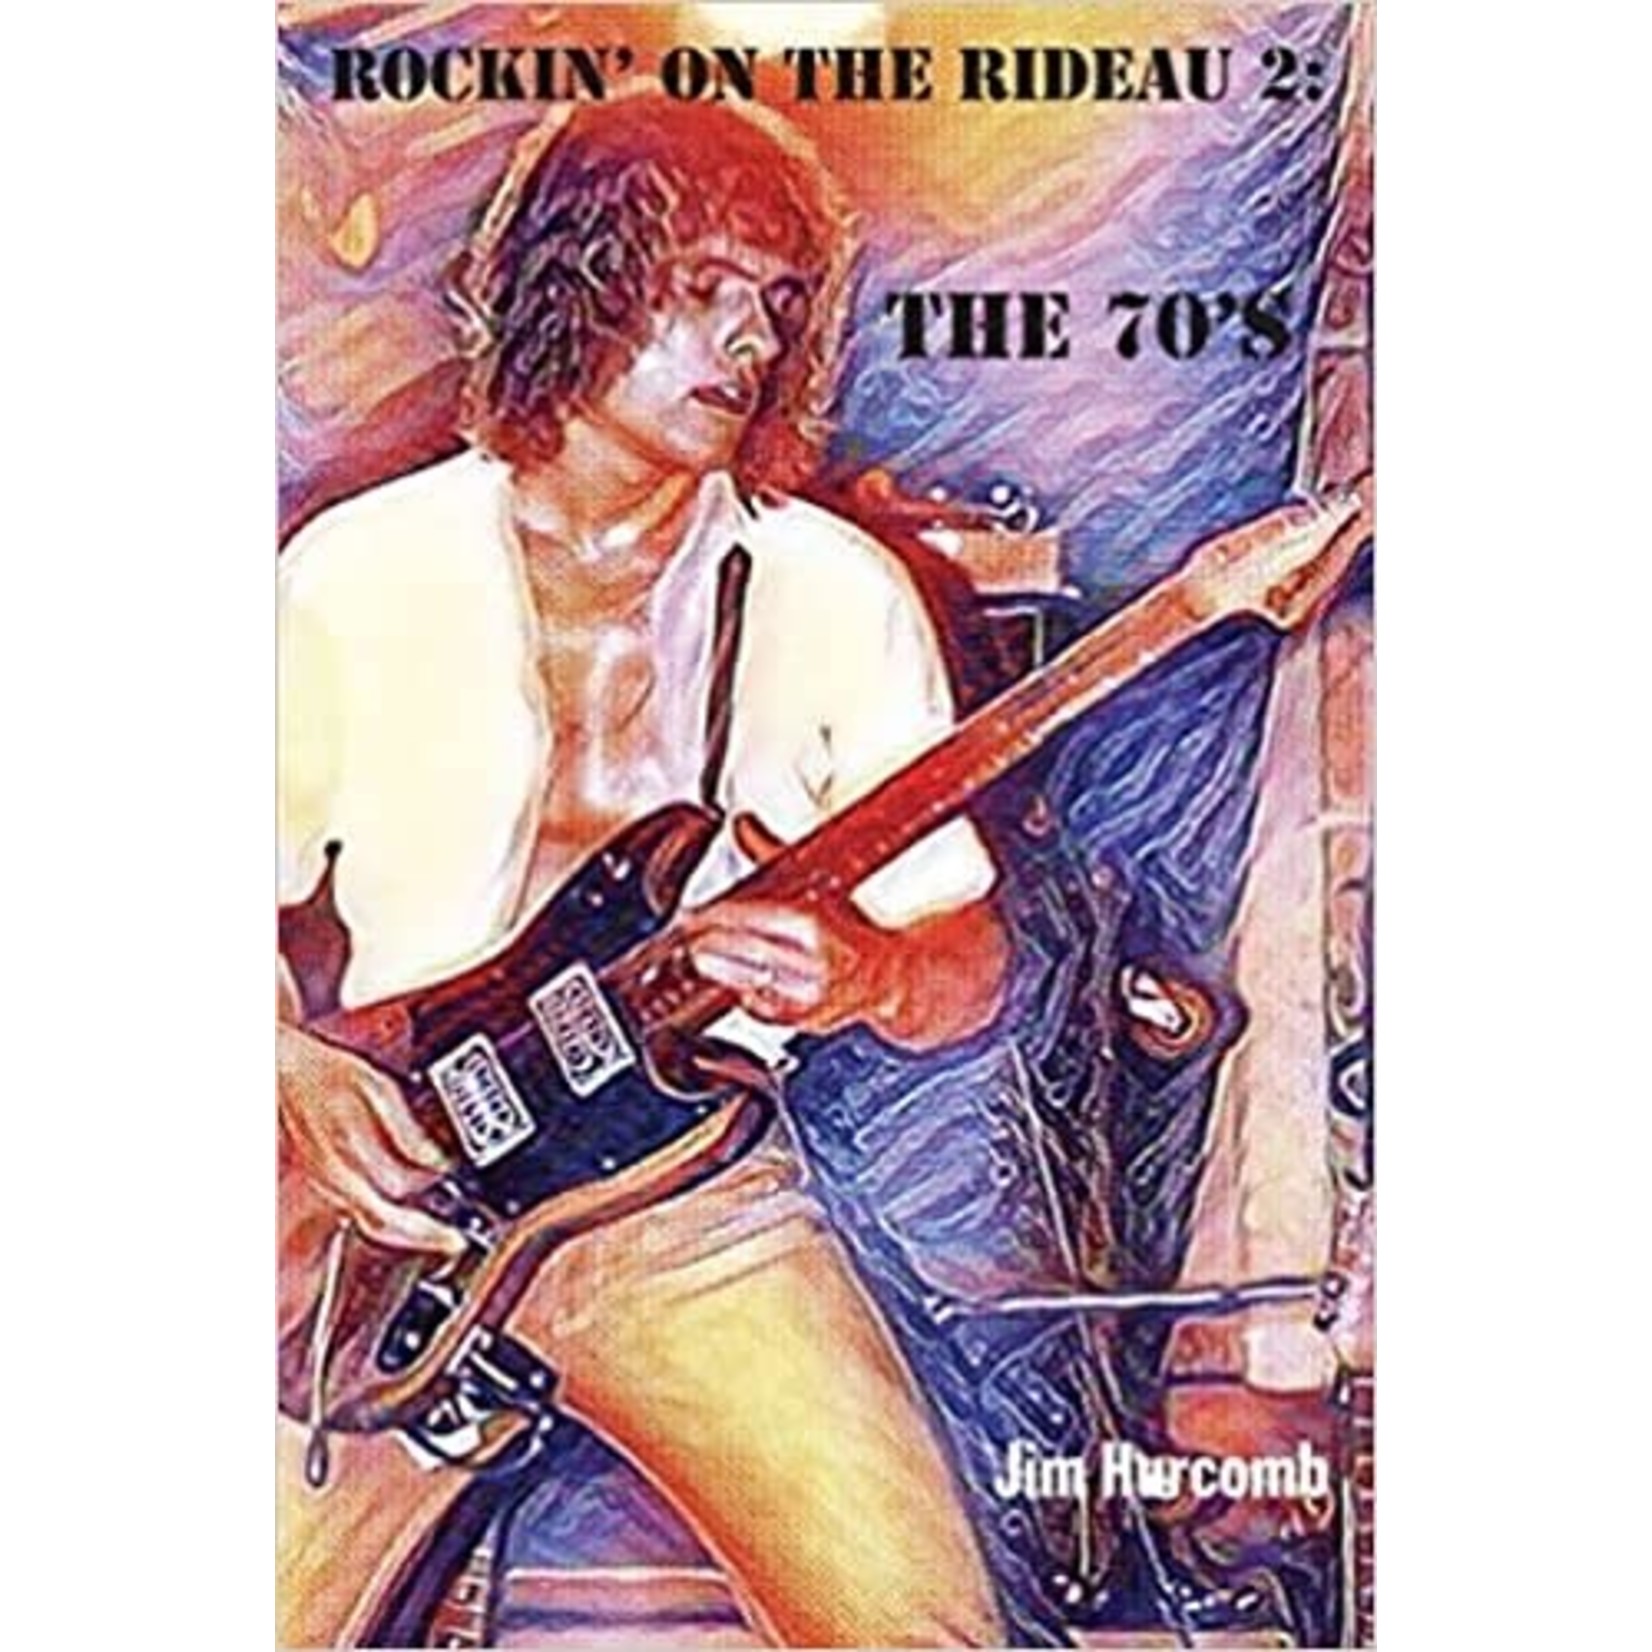 Rockin' On The Rideau 2: The 70's [Book]